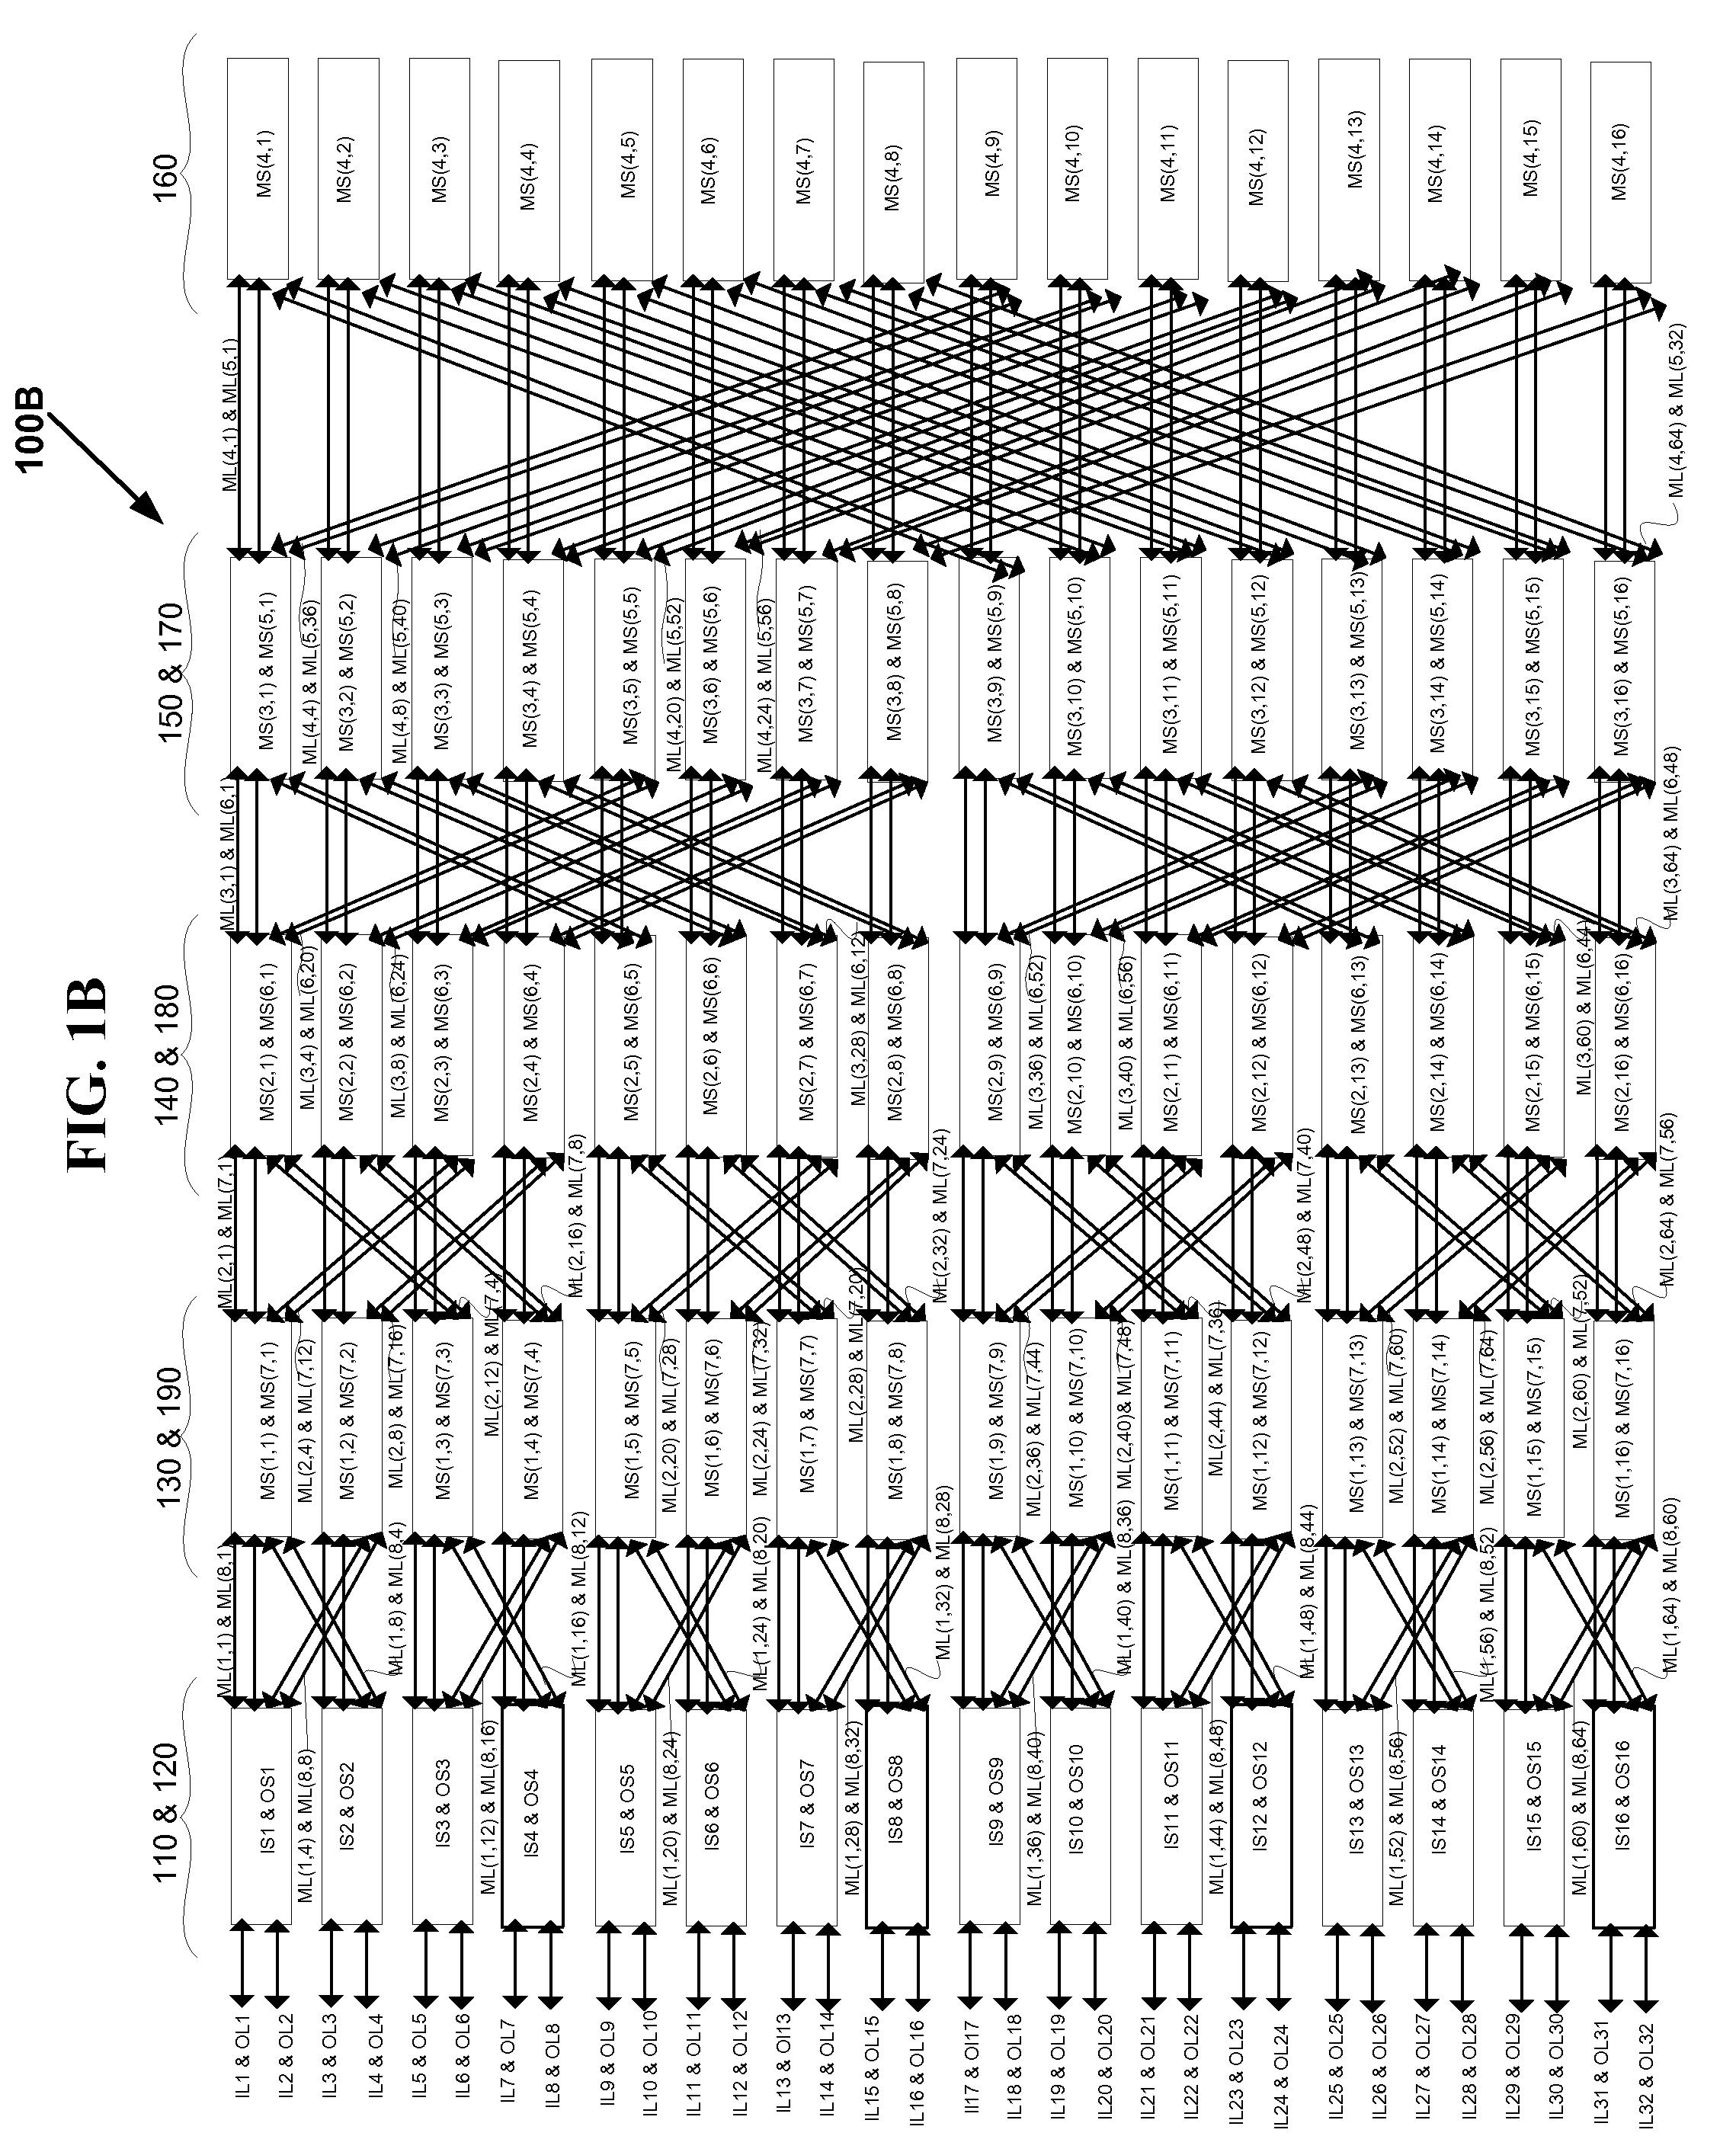 VLSI layouts of fully connected generalized networks